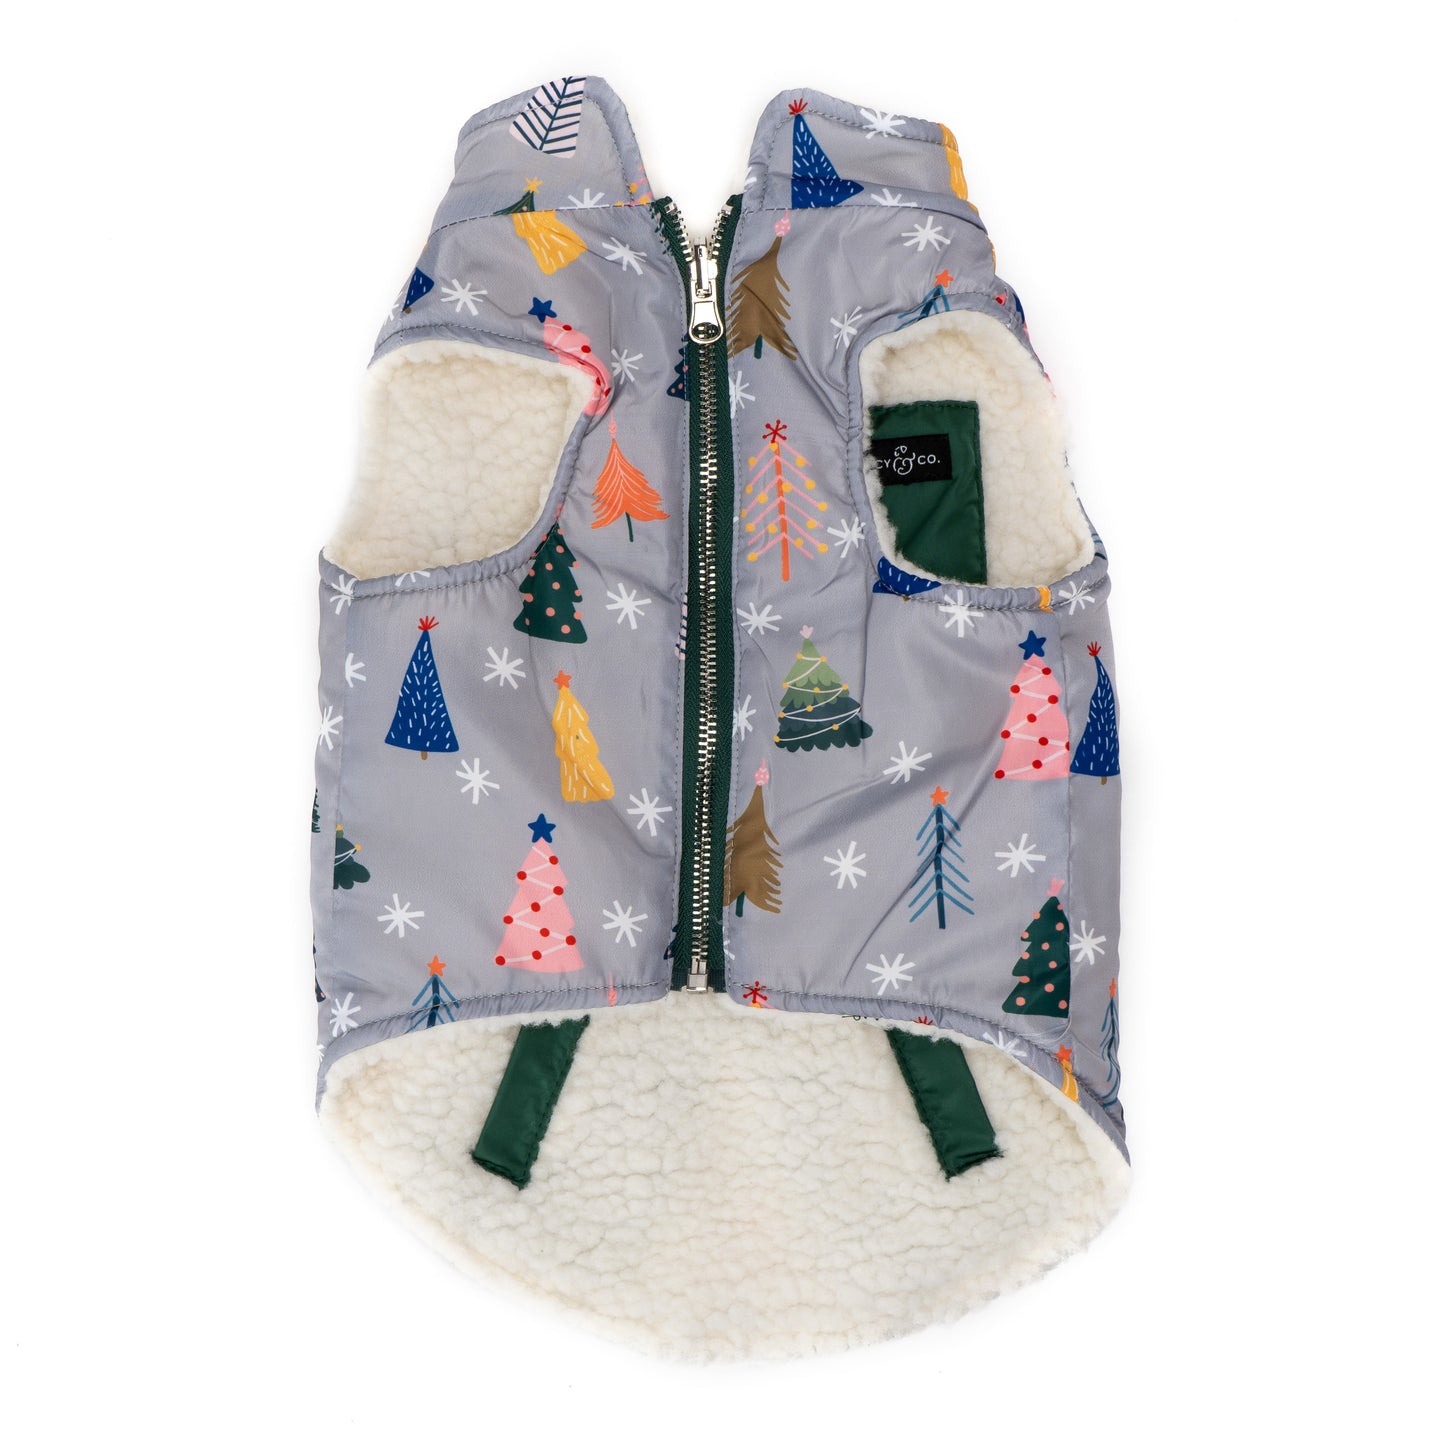 Limited Edition! The Tree-mendous Reversible Teddy Vest